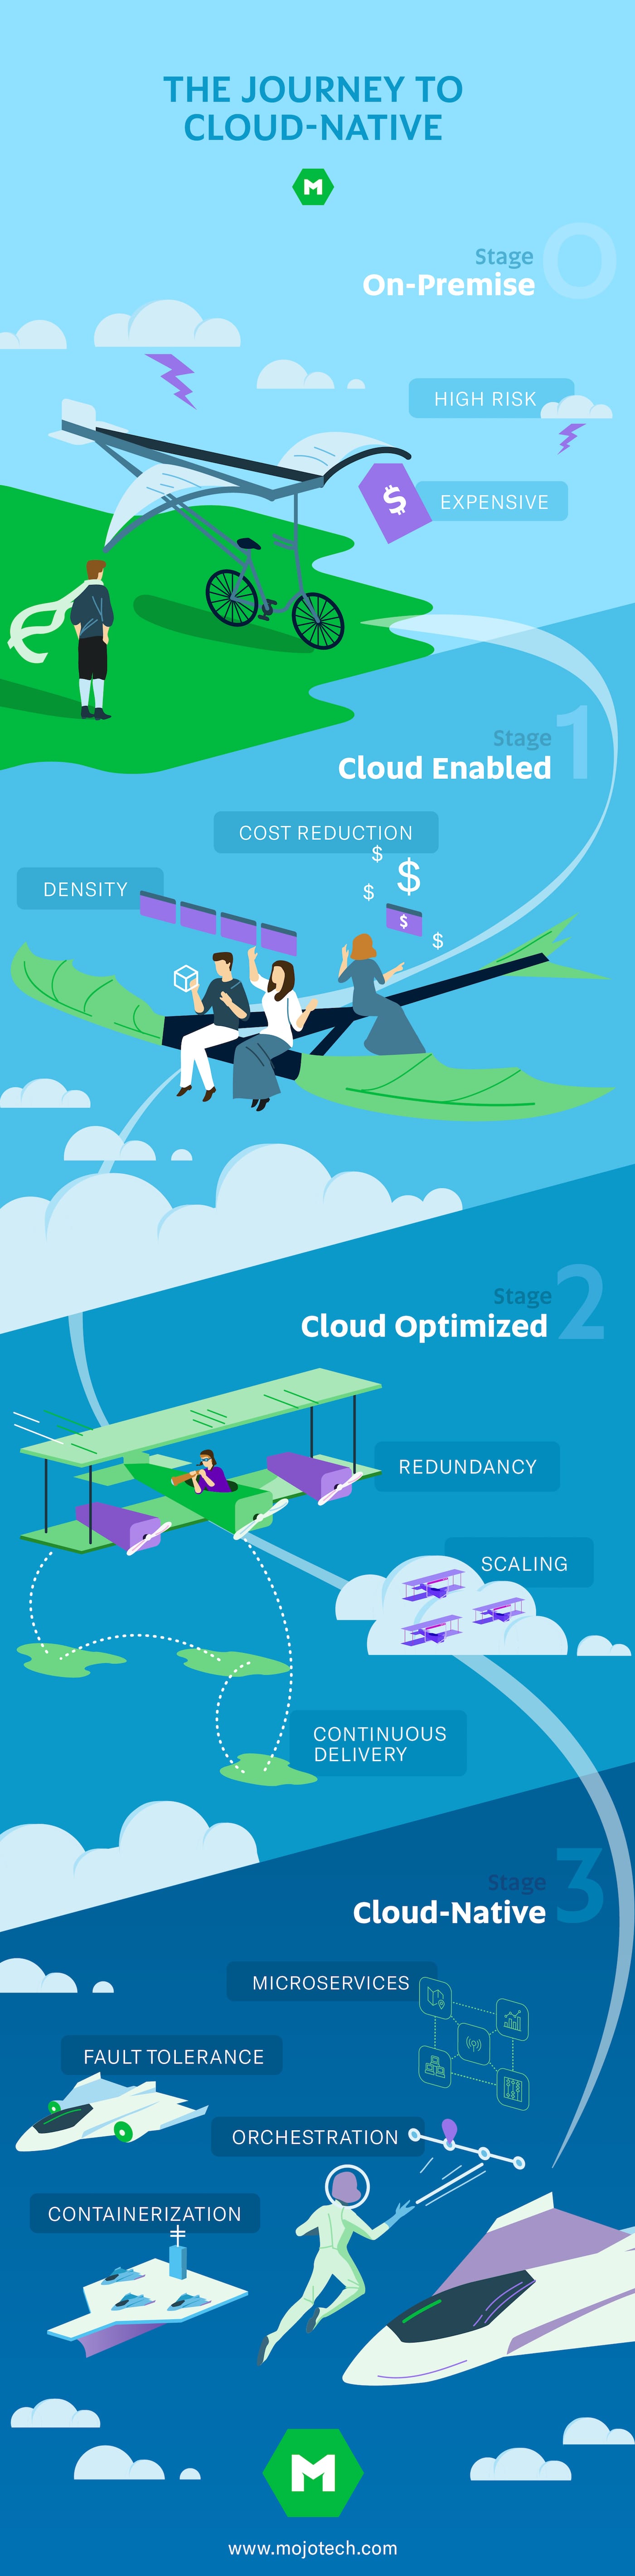 cloud-native-infographic